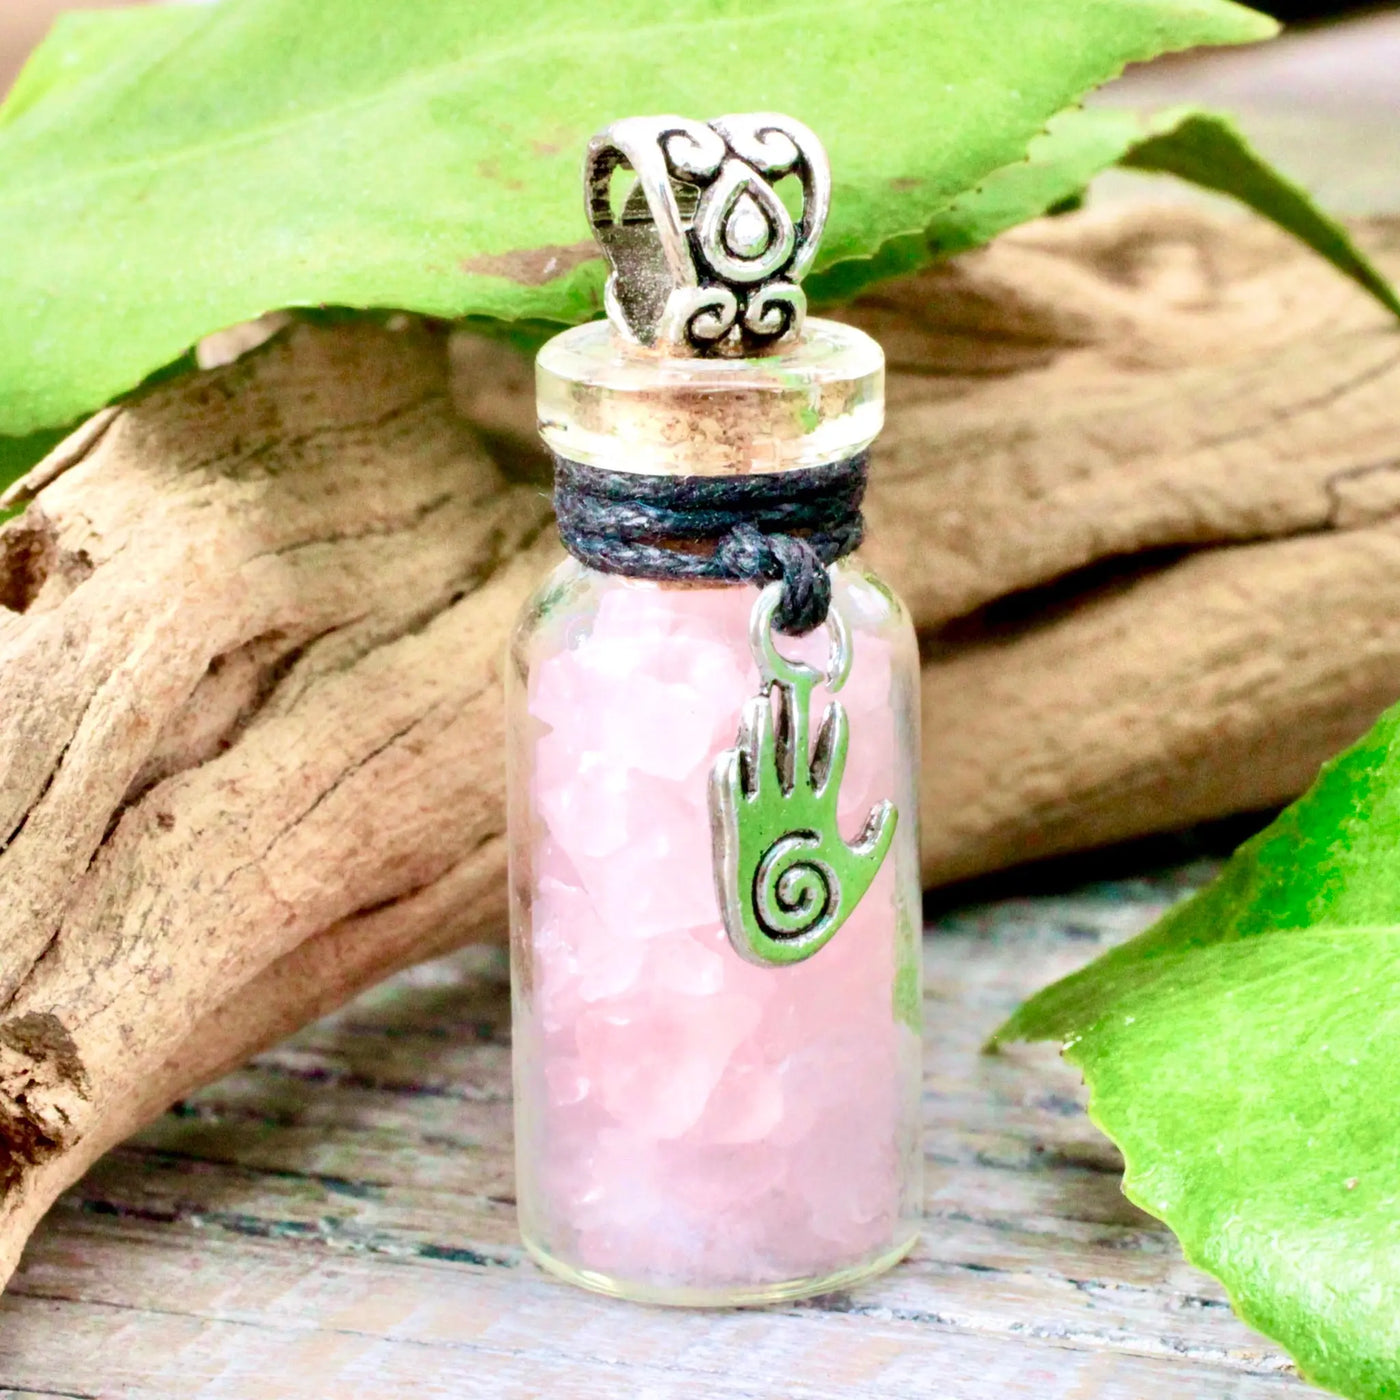 Healing Spell Jar with Rose Quartz Necklace